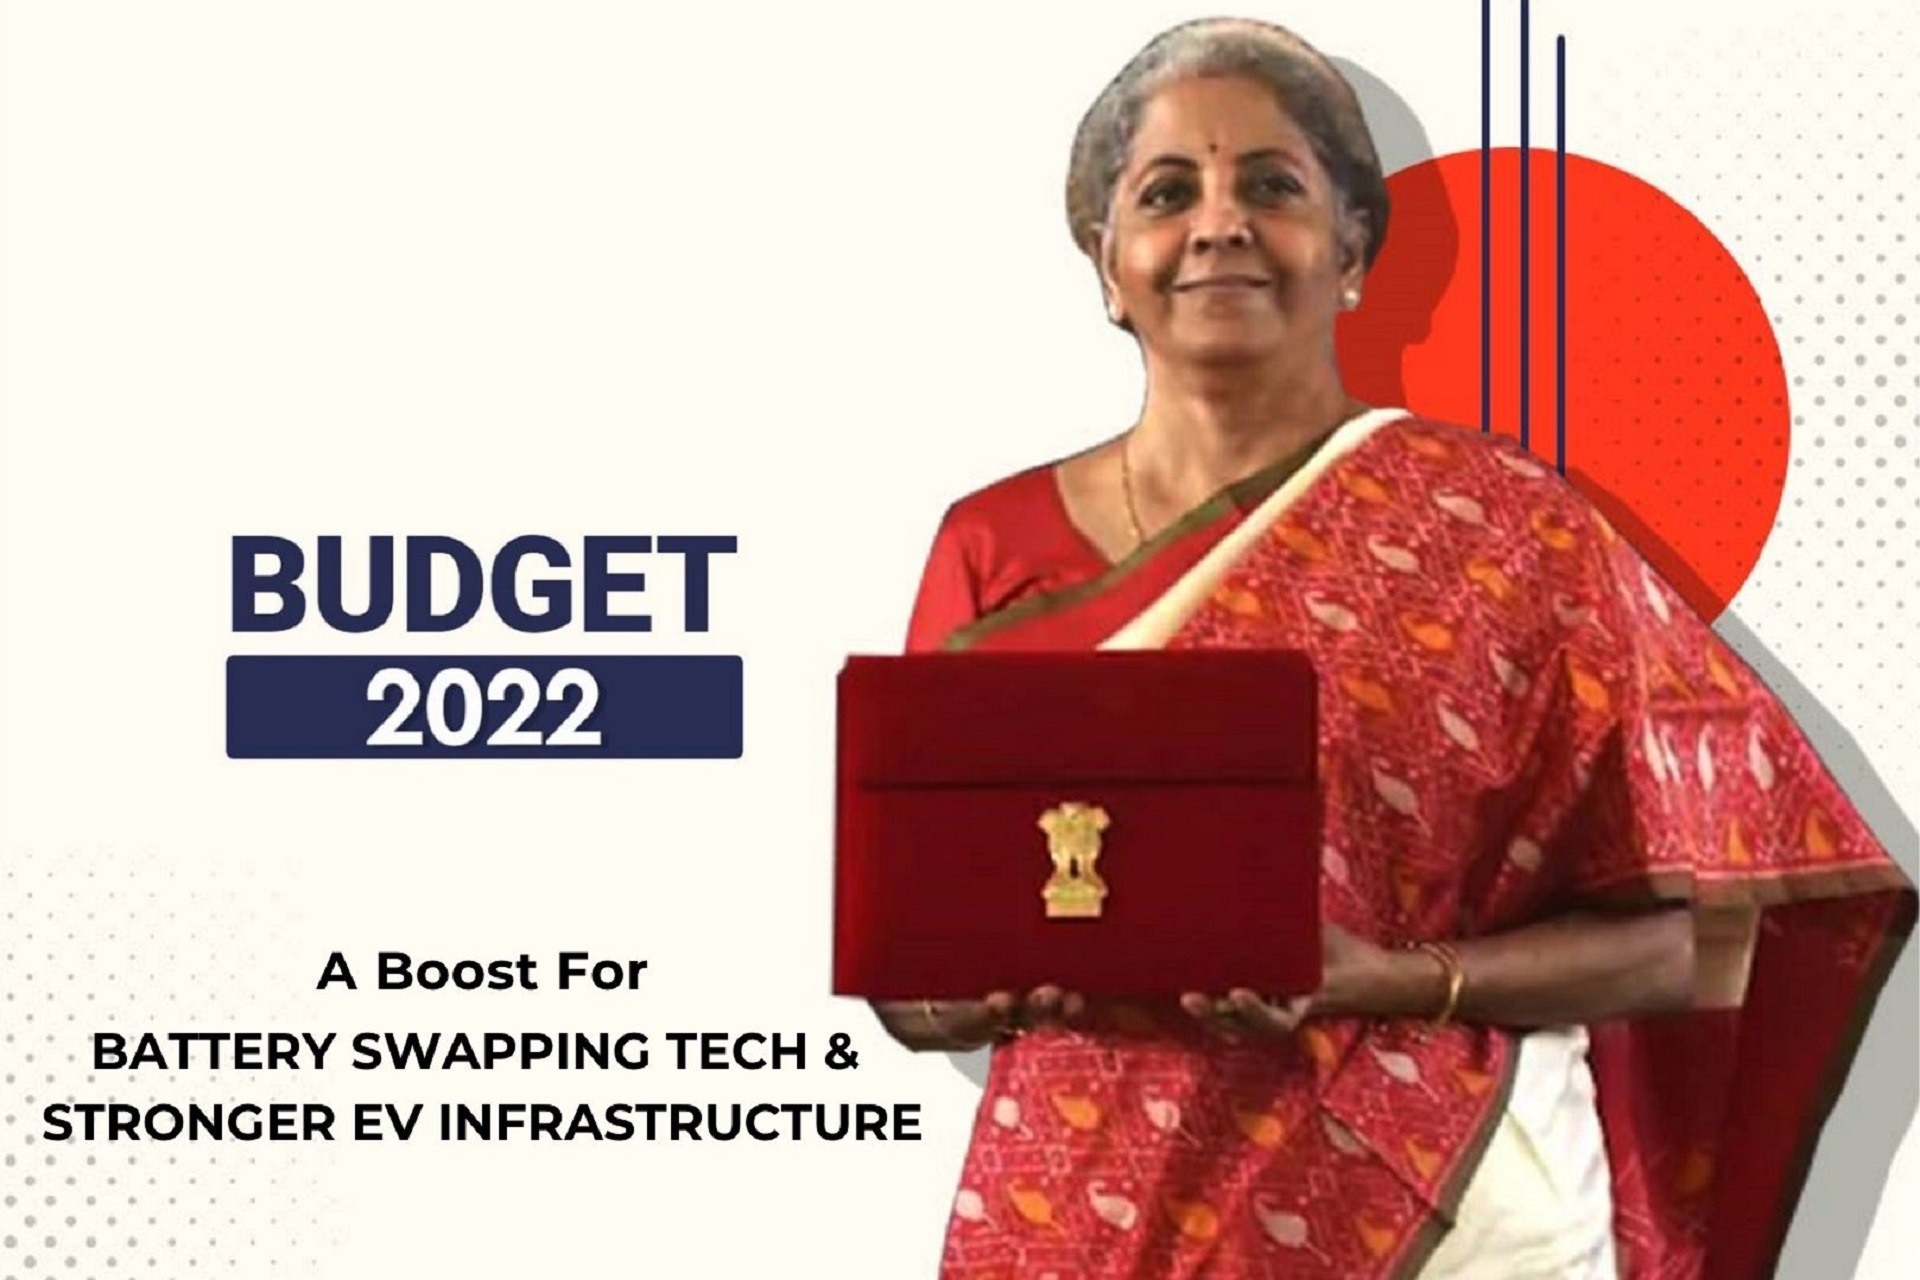 Indian Union Budget 2022 Pushes For Battery Swapping Tech & Stronger EV Infrastructure